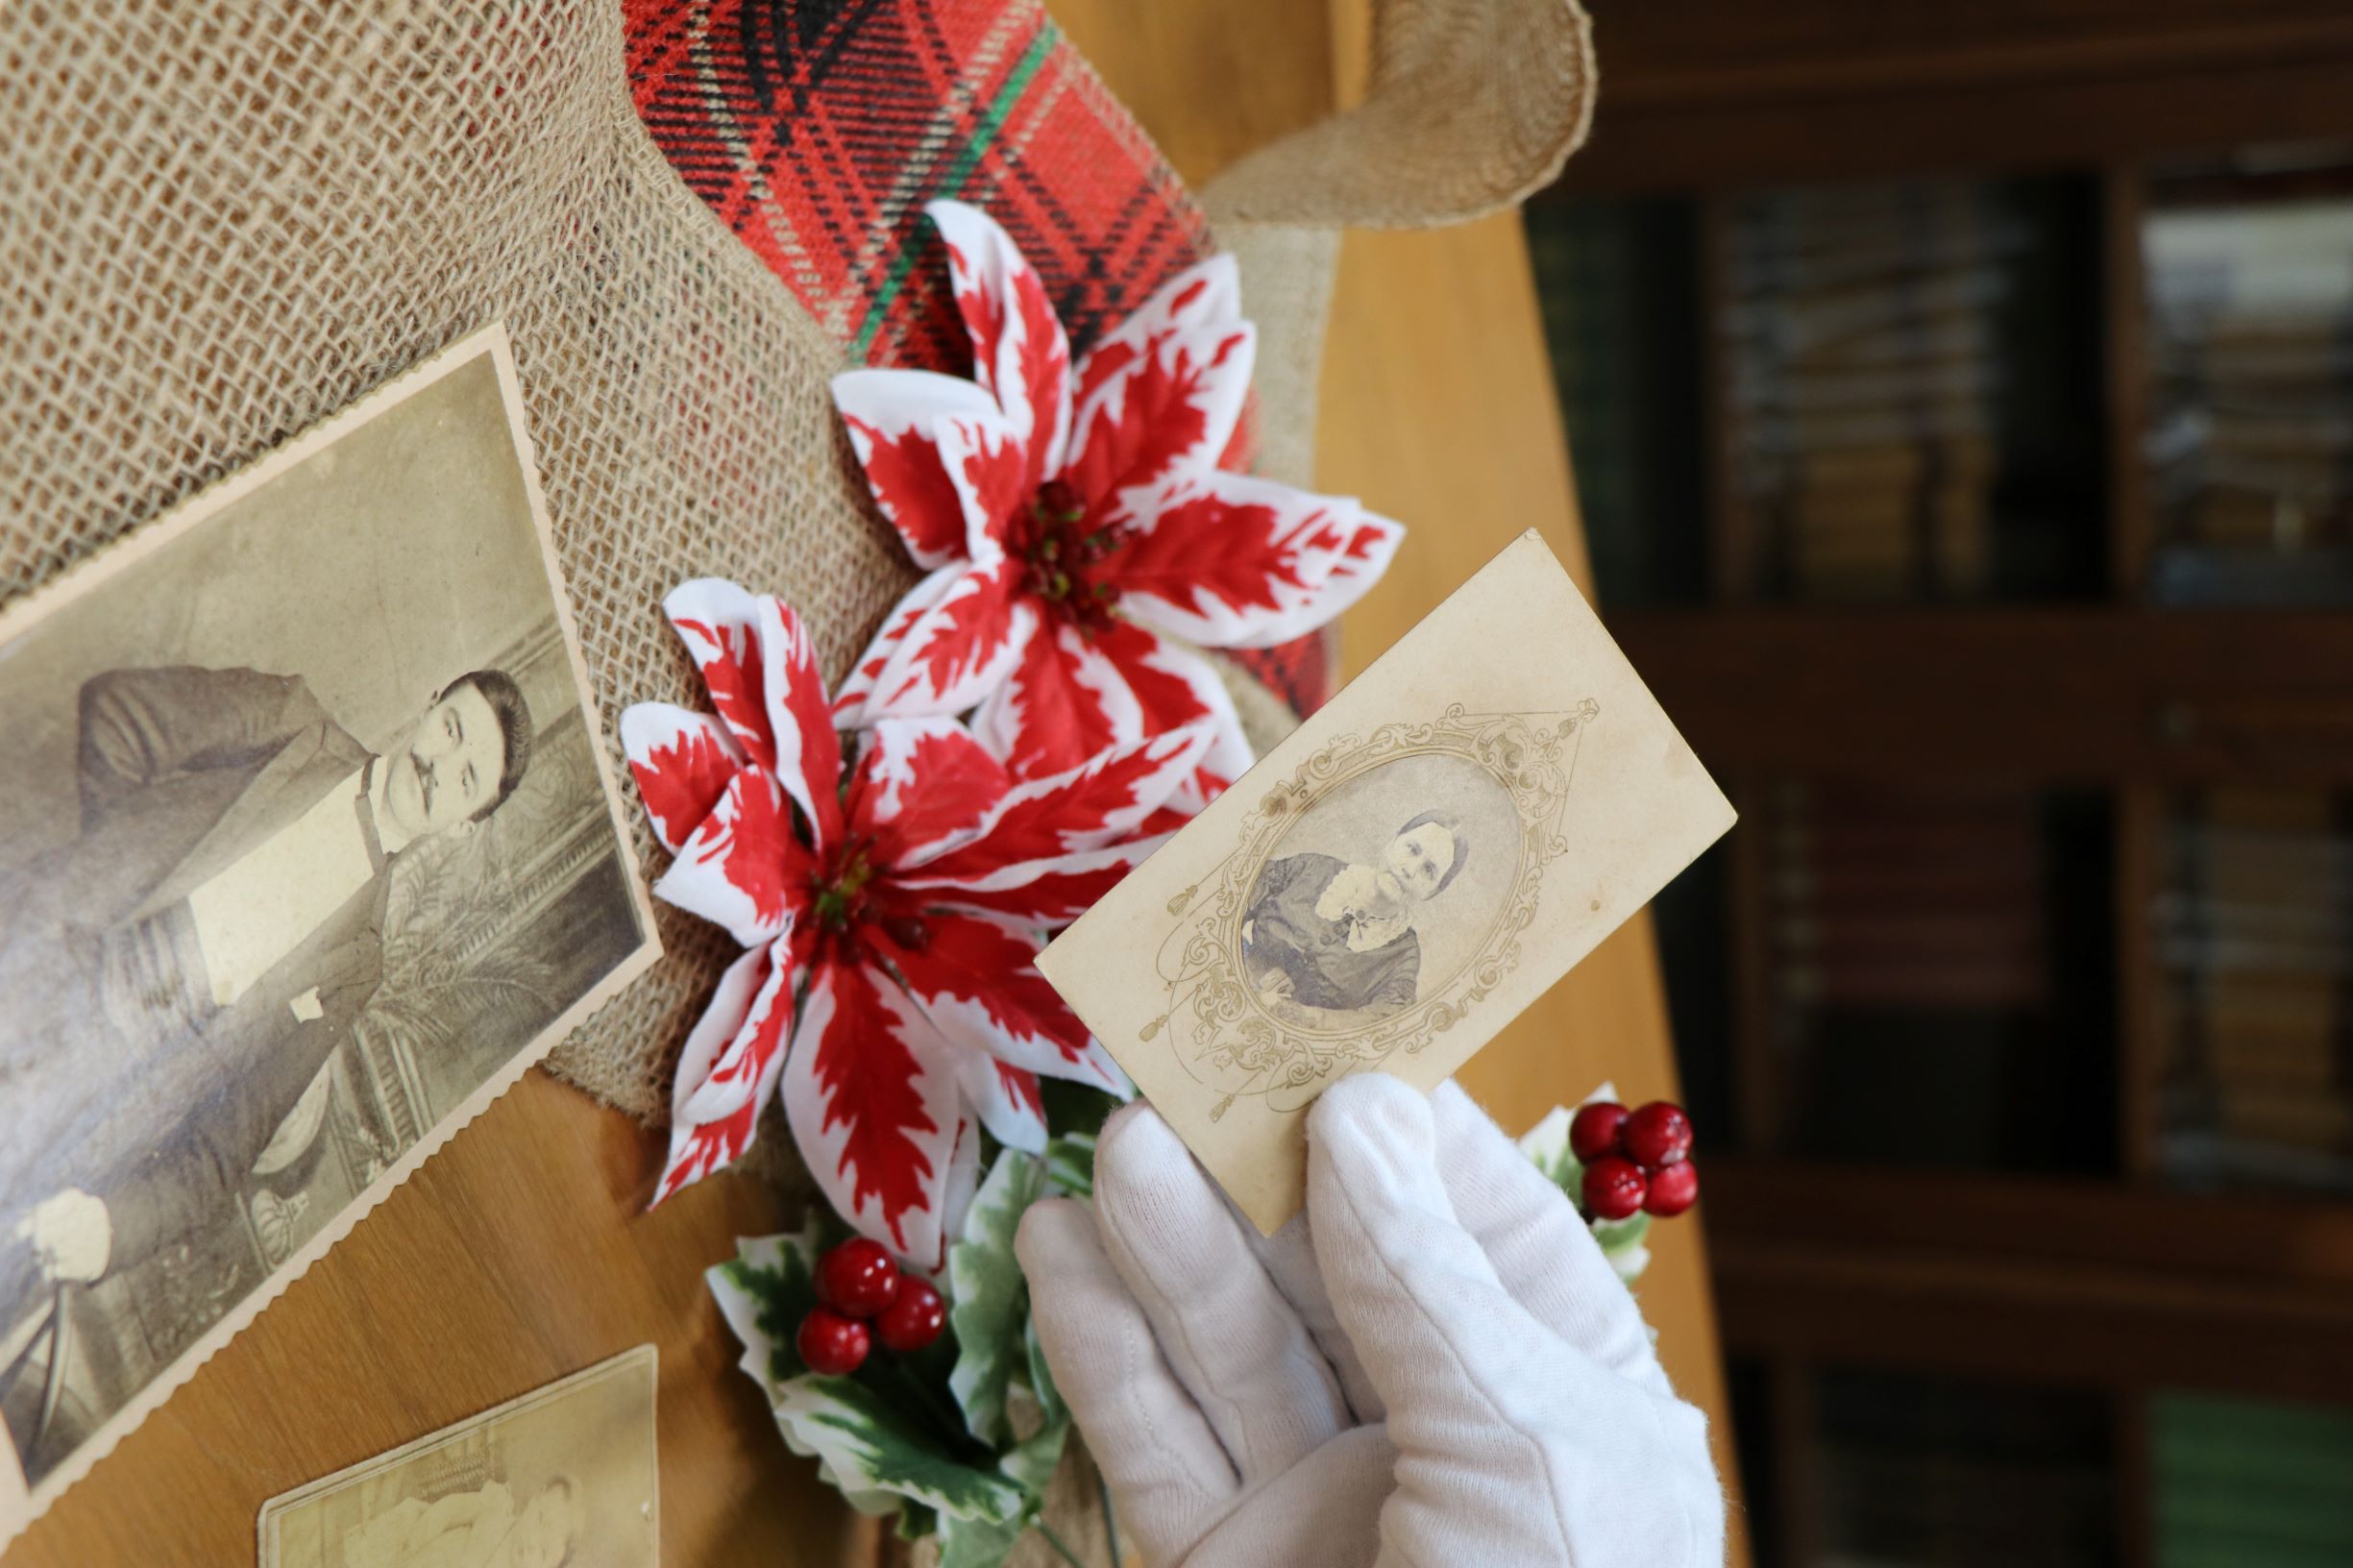 A gloved hand holds an old black and white photo. More old pictures lay on a table decorated with burlap and flowers.